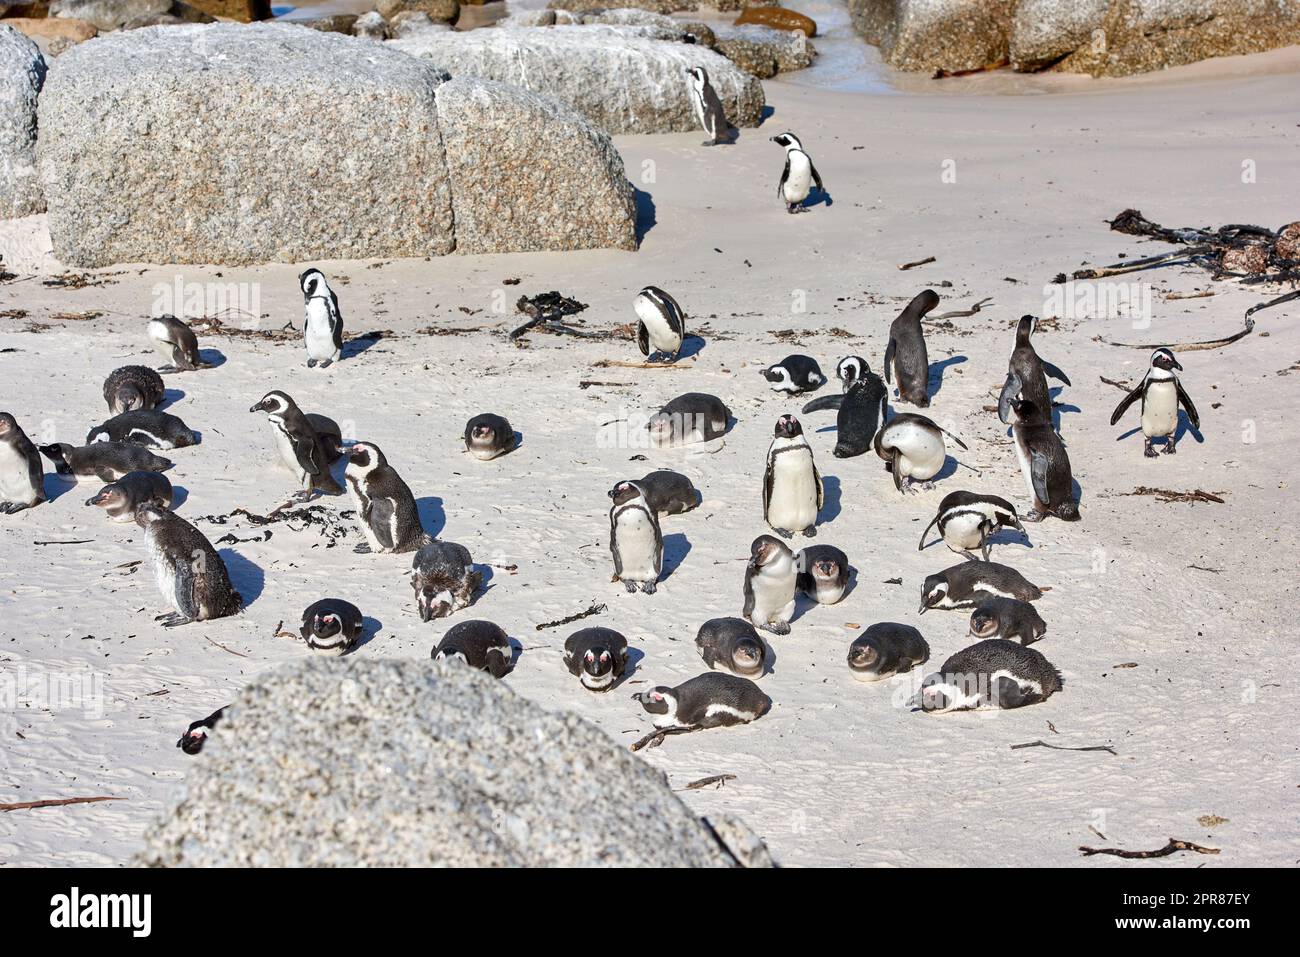 Group of penguins sunbathing near boulders. Flightless birds in their natural habitat. Colony of endangered black footed or Cape penguin species at sandy Boulders Beach in Cape Town, South Africa Stock Photo